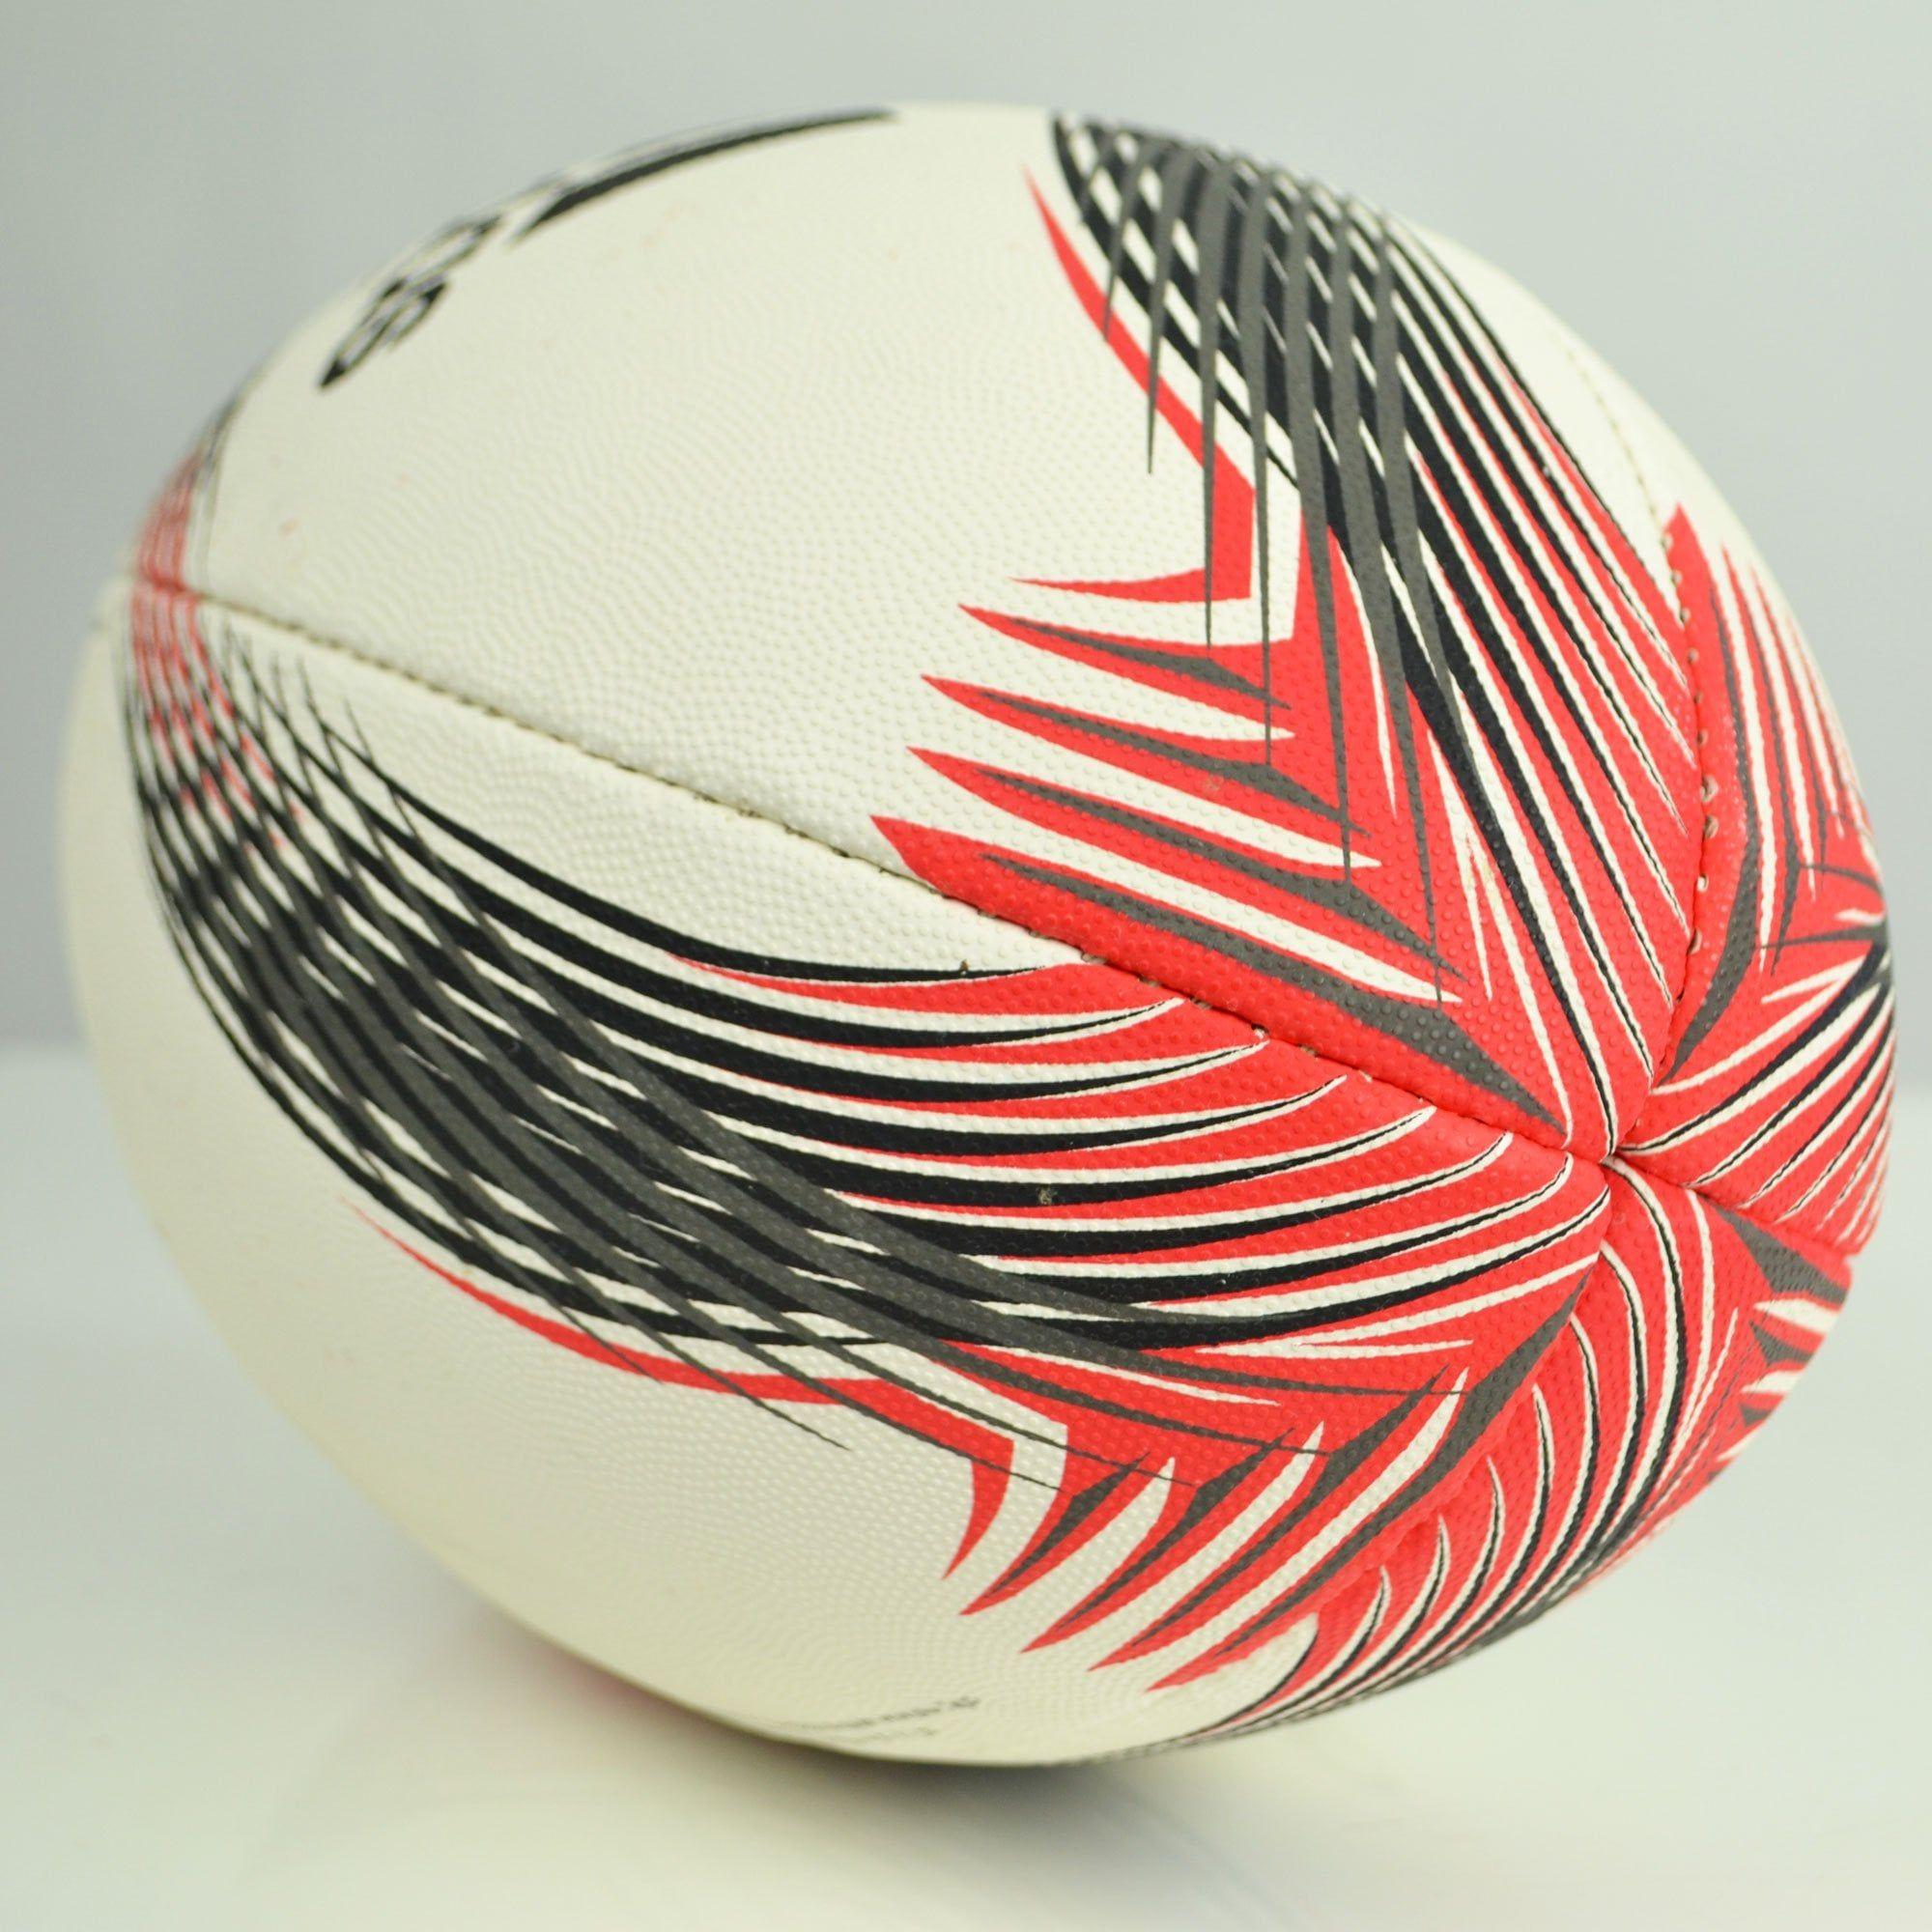 Red Sphere White X Logo - Torpedo X-Ebit Rugby Ball - White, Black and Red